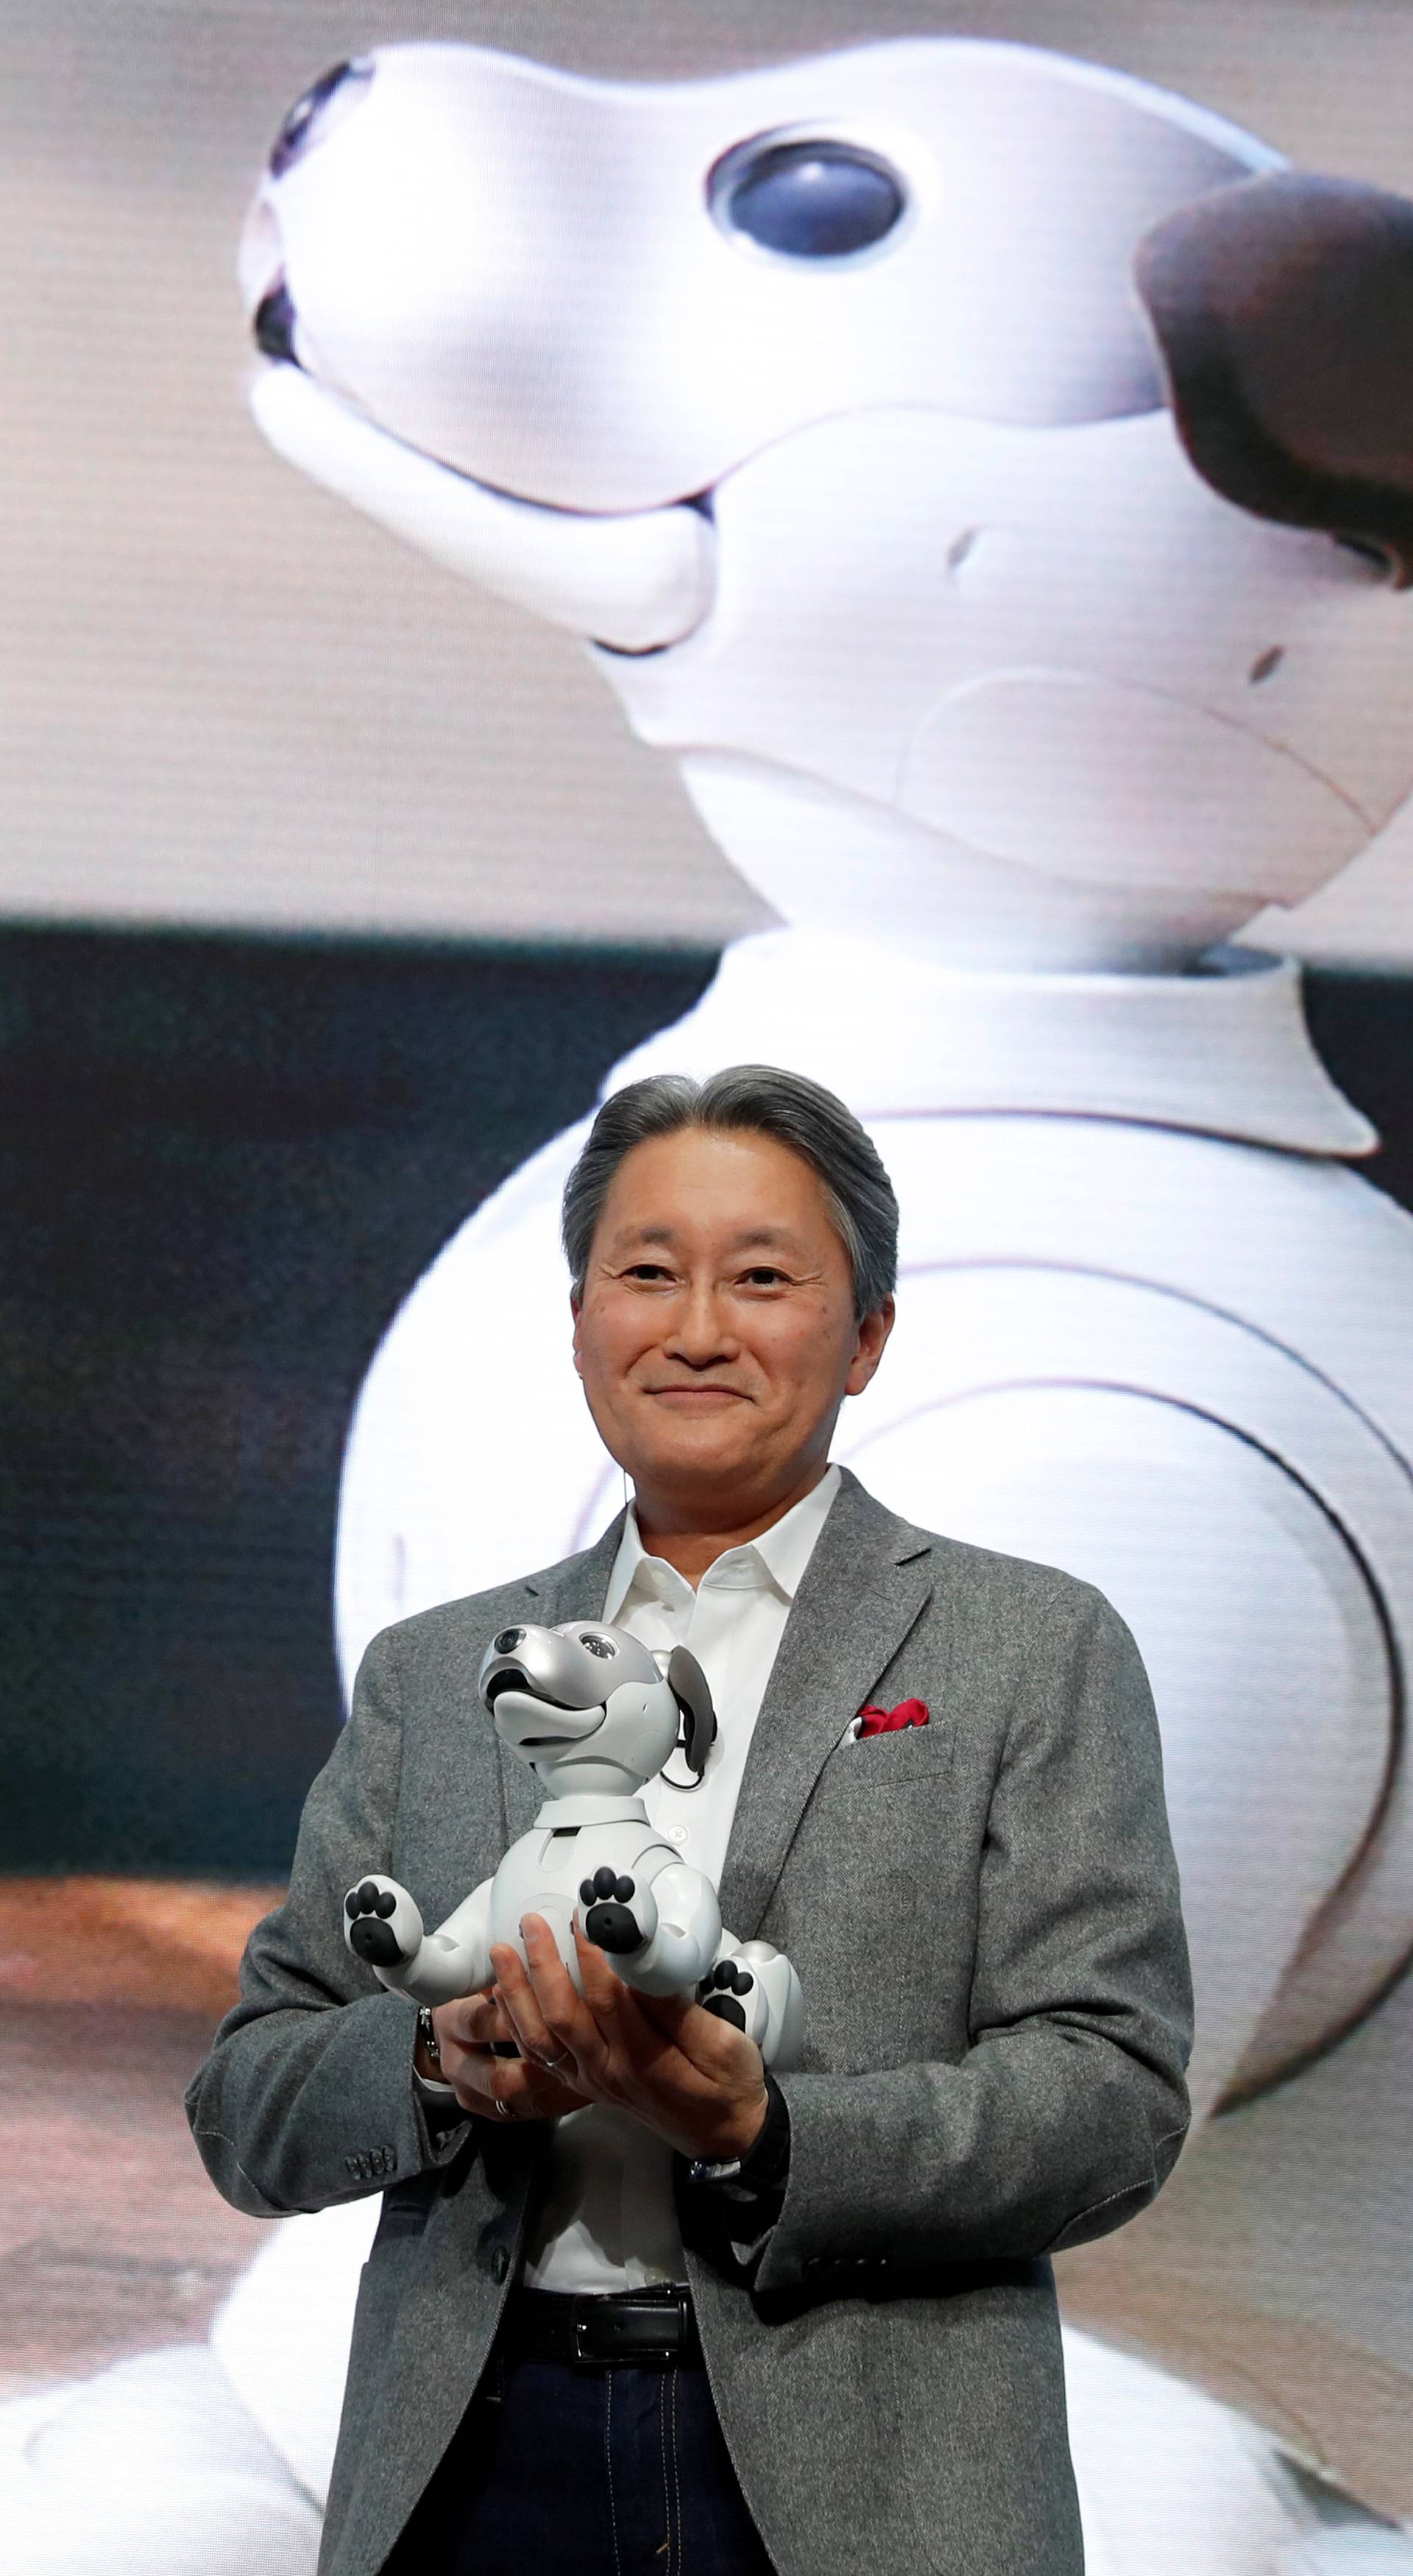 Kazuo Hirai, president and CEO of Sony Corporation, holds an Aibo robotic dog during a news conference at the 2018 CES in Las Vegas